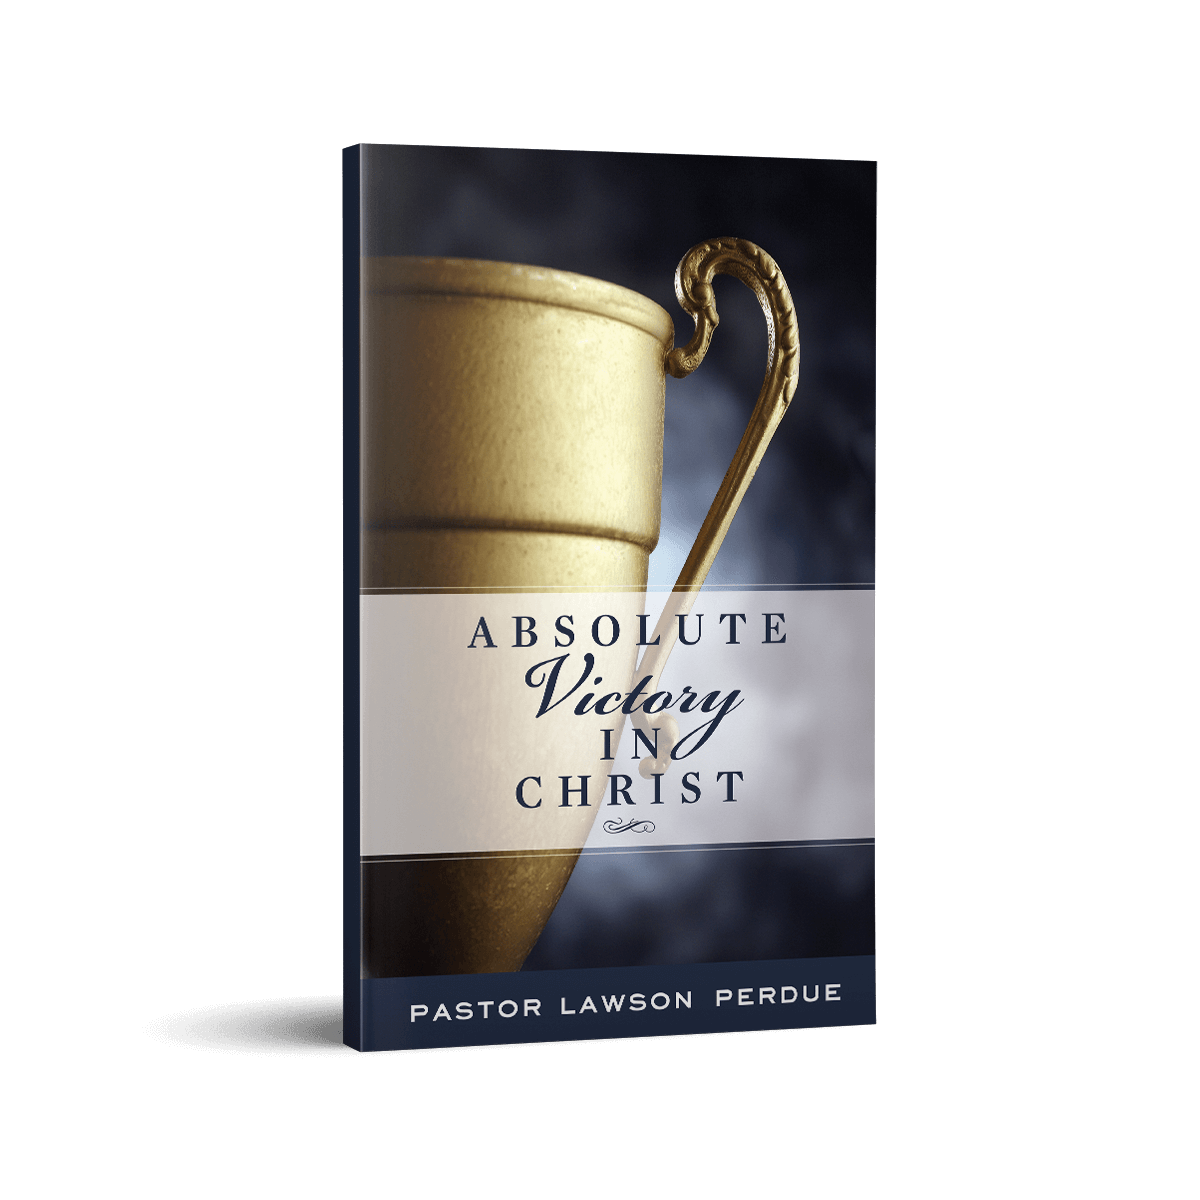 Absolute Victory in Christ by Pastor Lawson Perdue